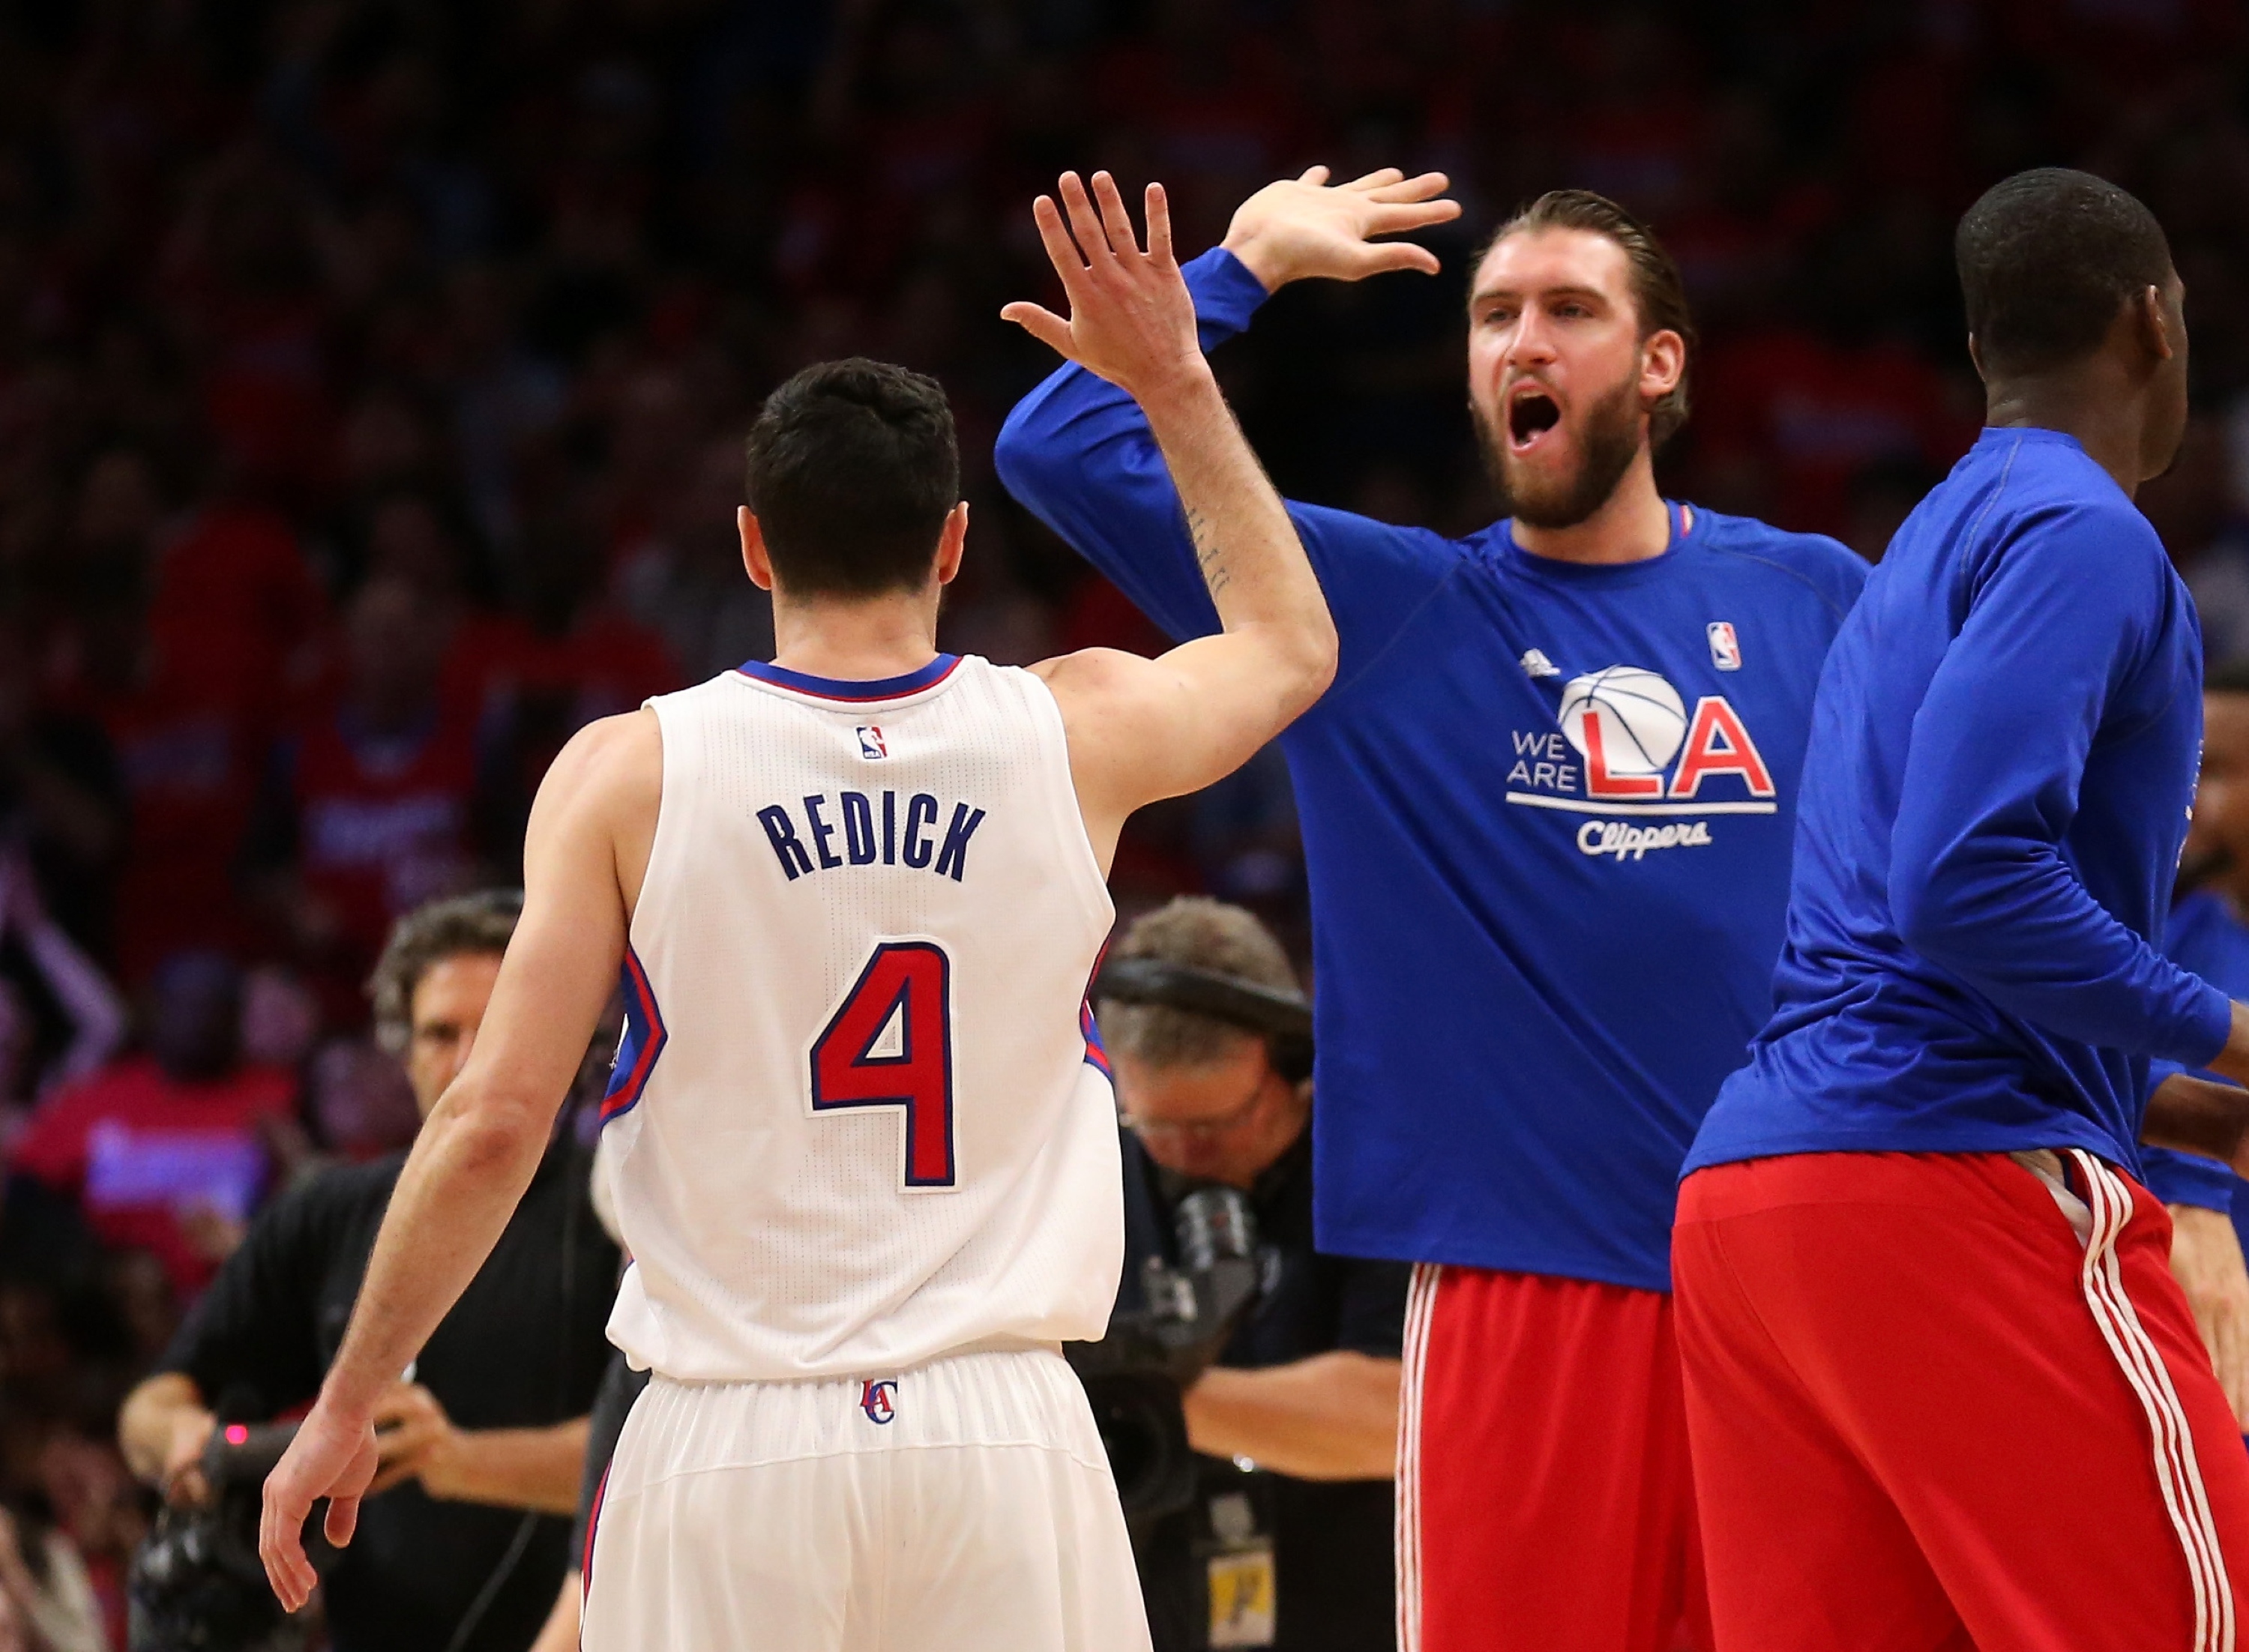 Spencer Hawes contributes. (Stephen Dunn/Getty Images)